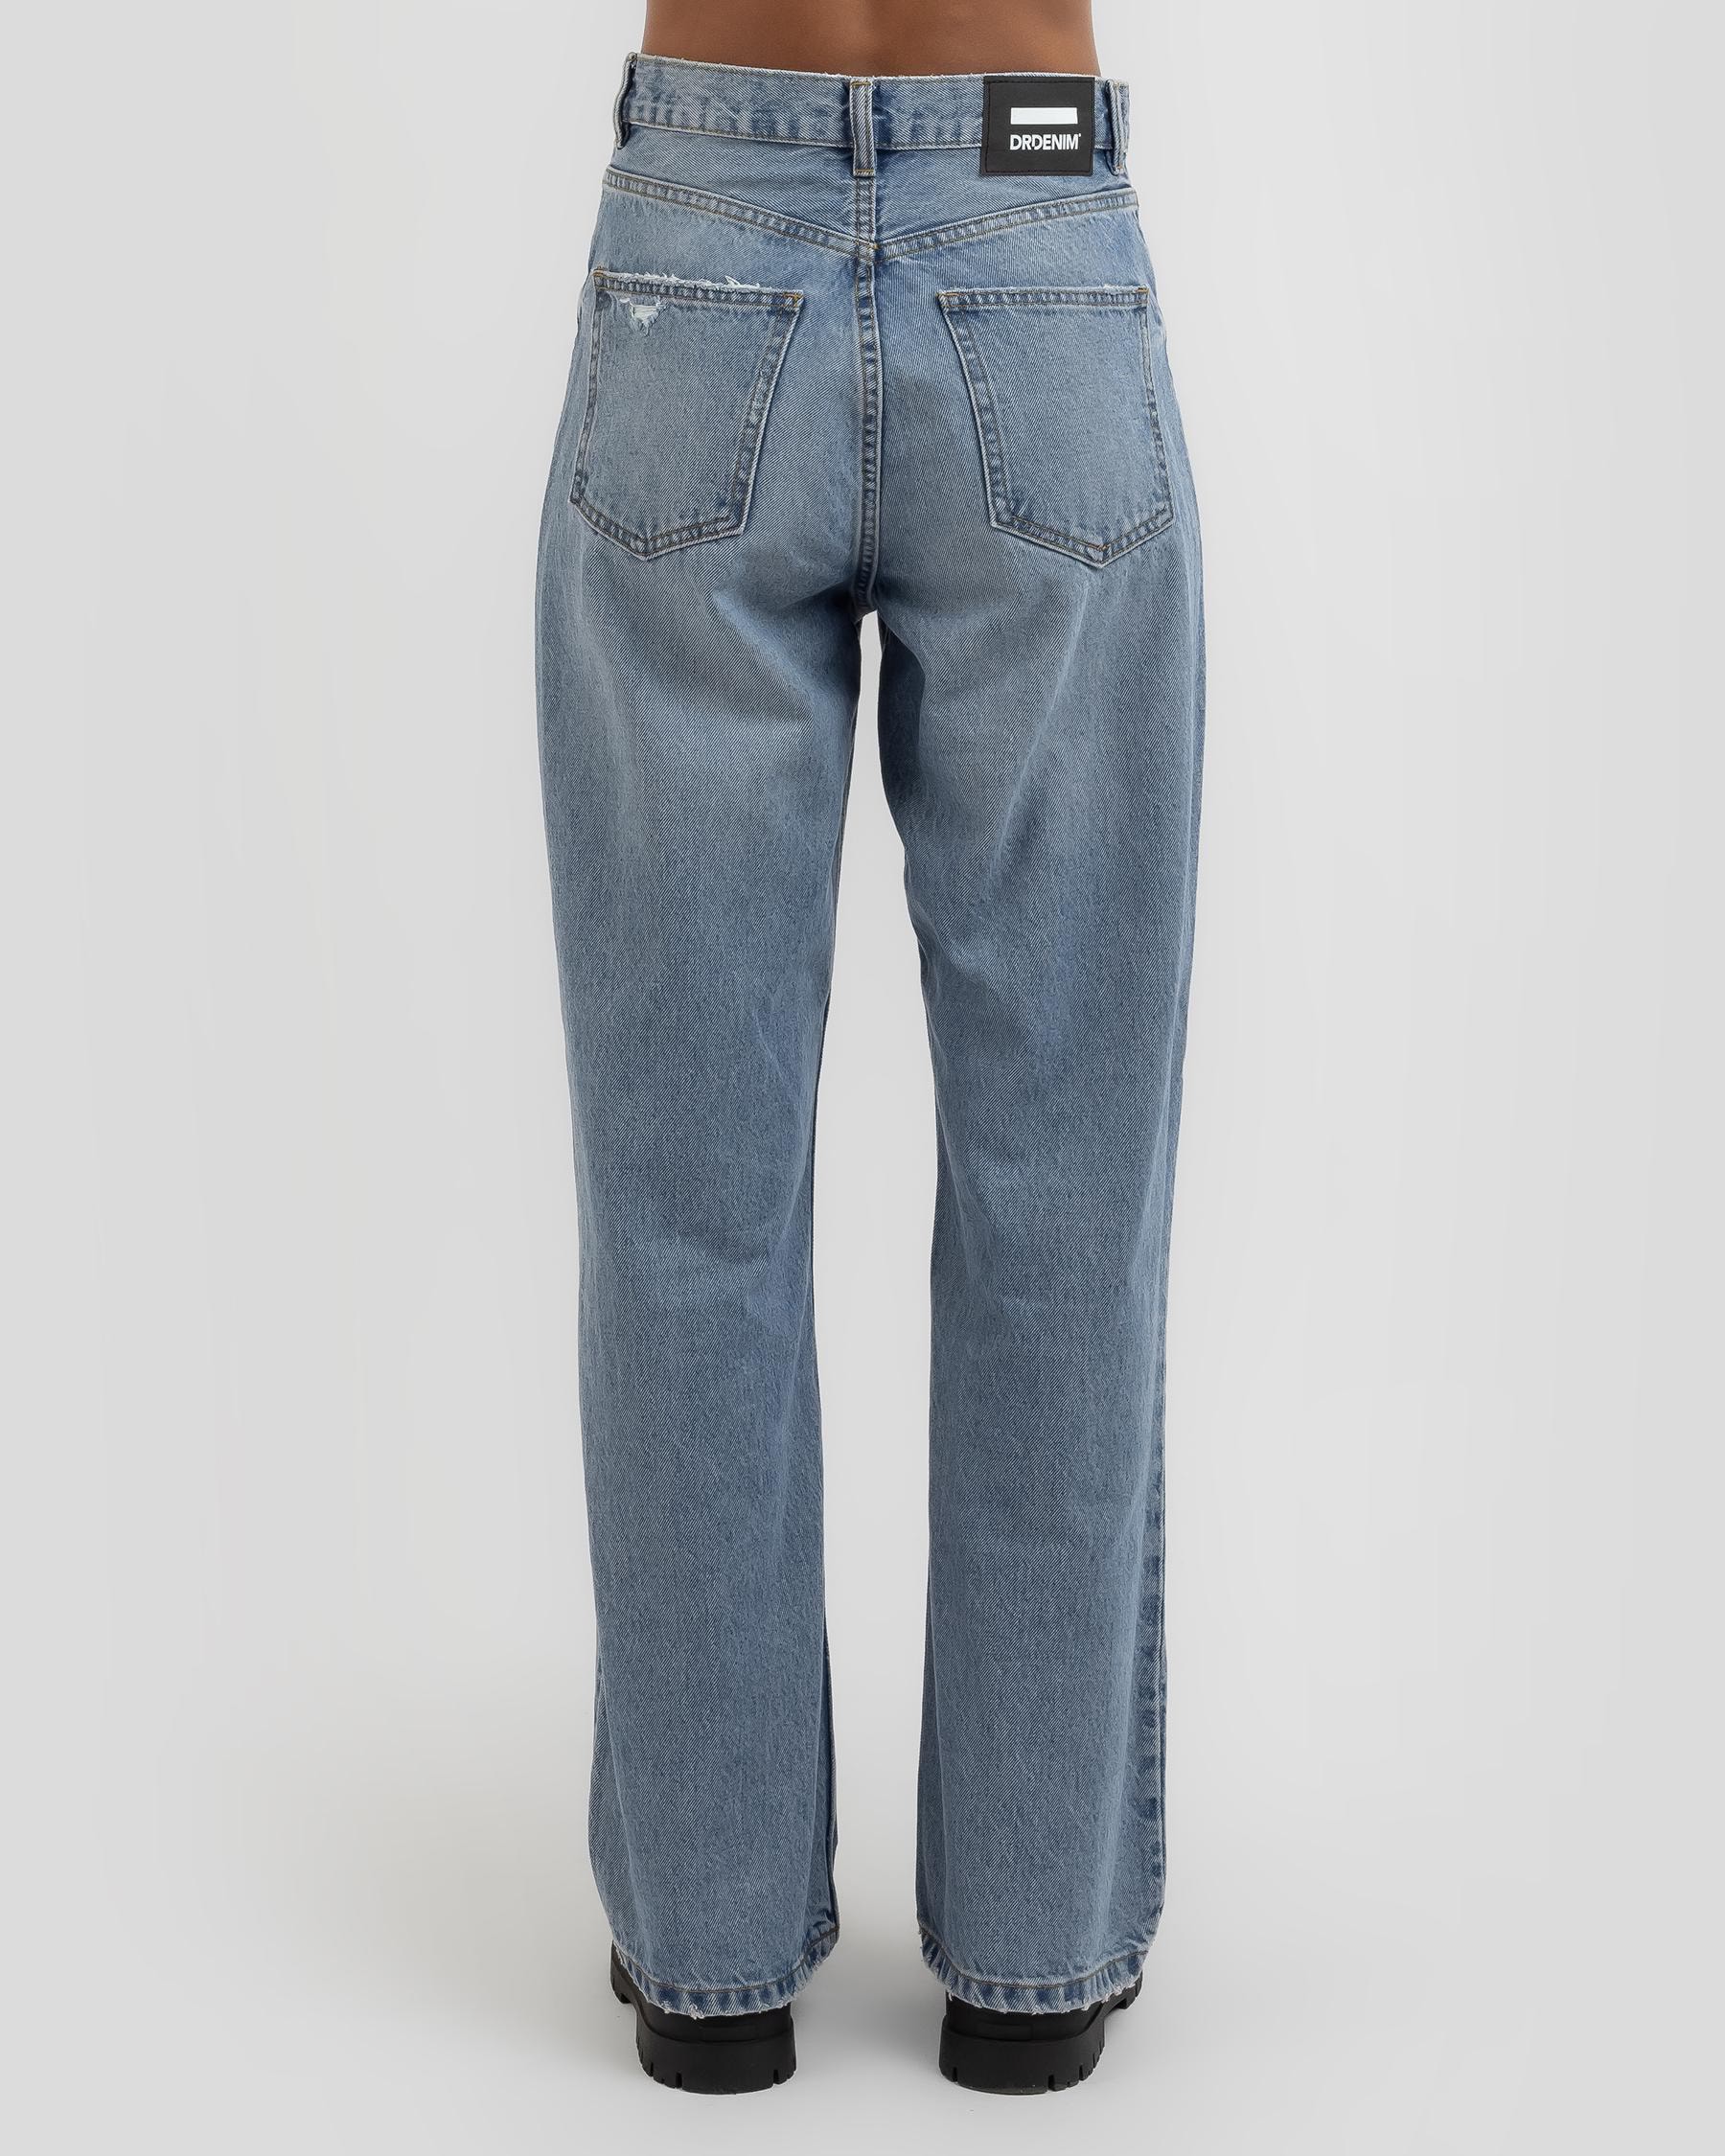 Dr Denim Echo Jeans In Blue Jay - Fast Shipping & Easy Returns - City ...